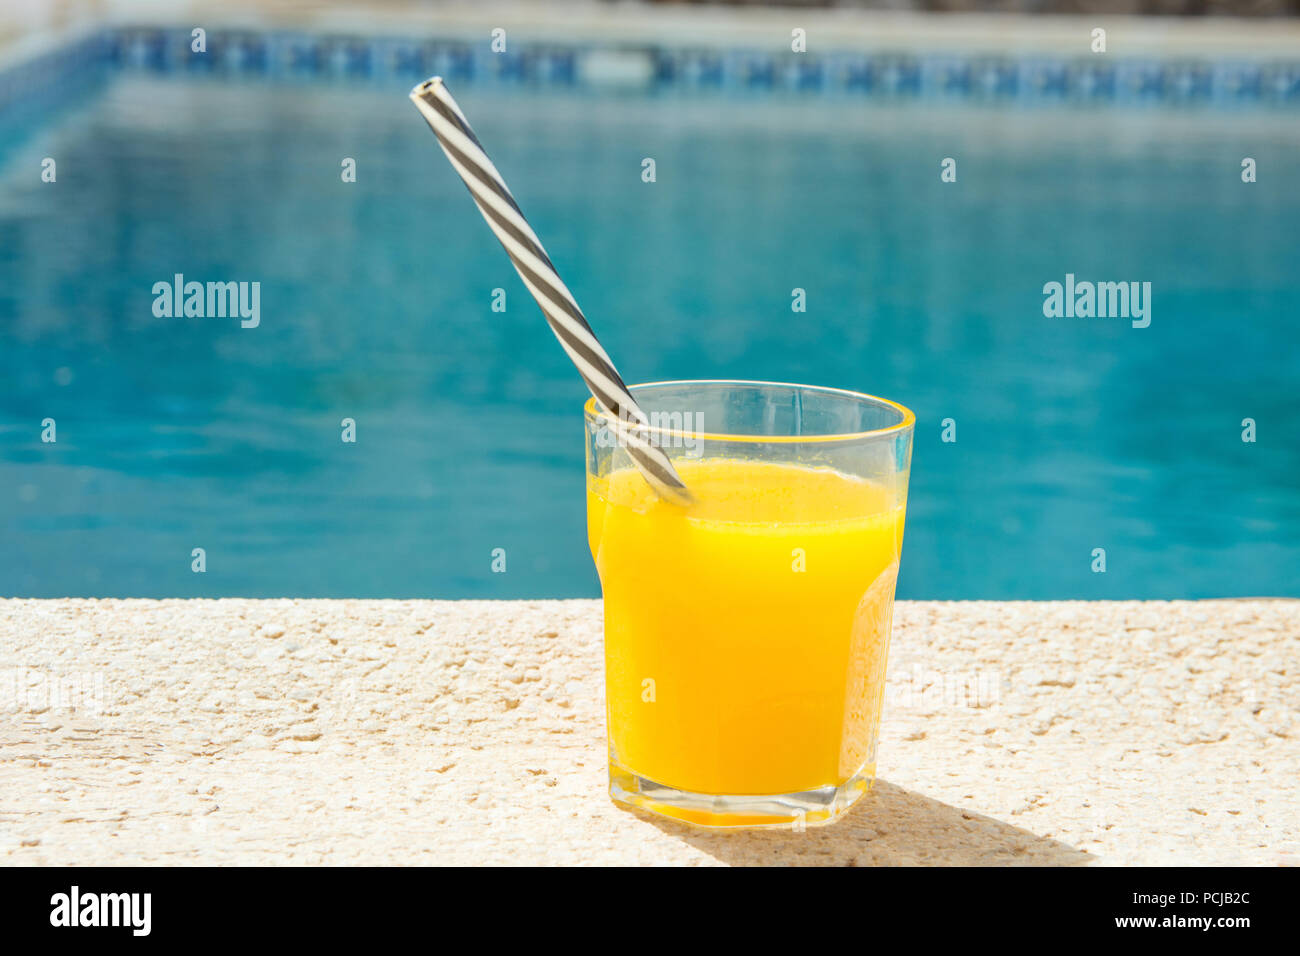 Glass of freshly pressed tropical fruits orange juice with striped straw standing on deck of swimming pool. Bright sunlight. Summer vacation relaxatio Stock Photo